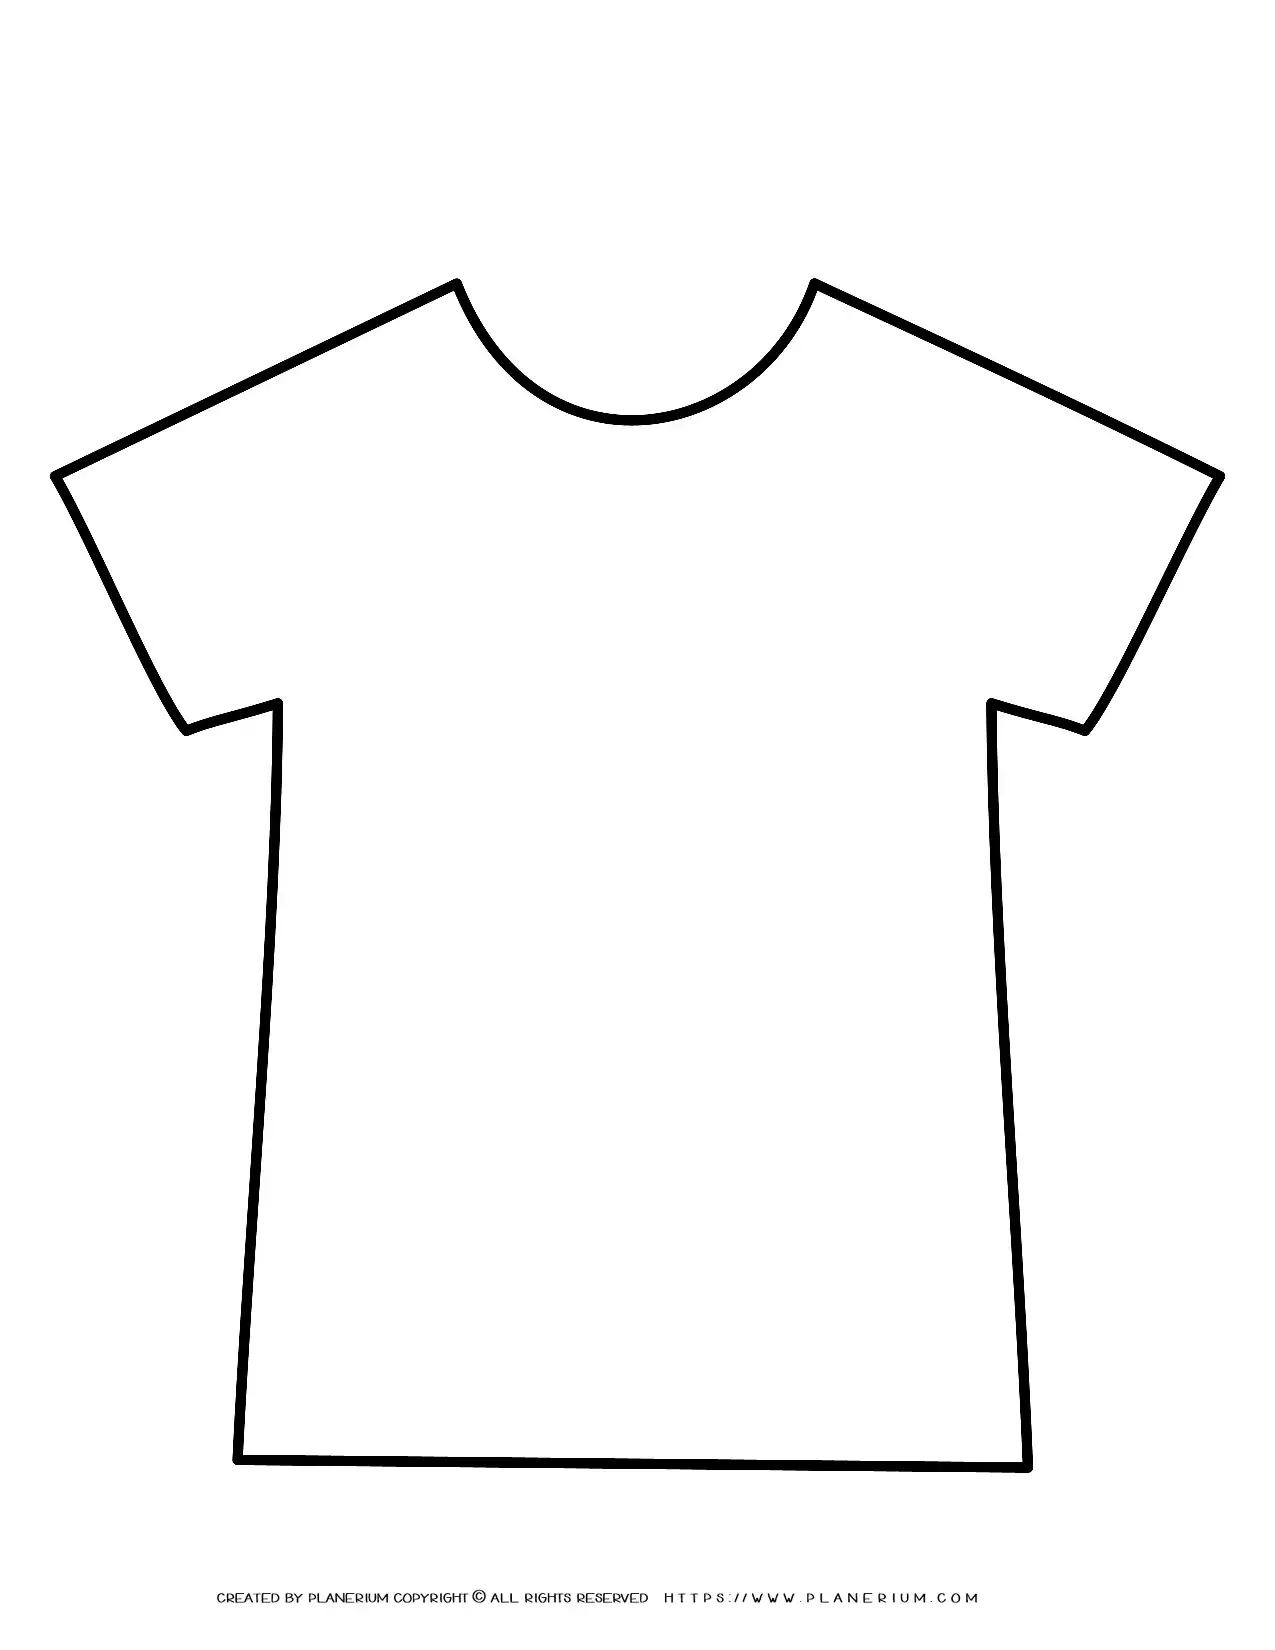 Encourage Creativity and Learning with a Printable T-shirt Outline